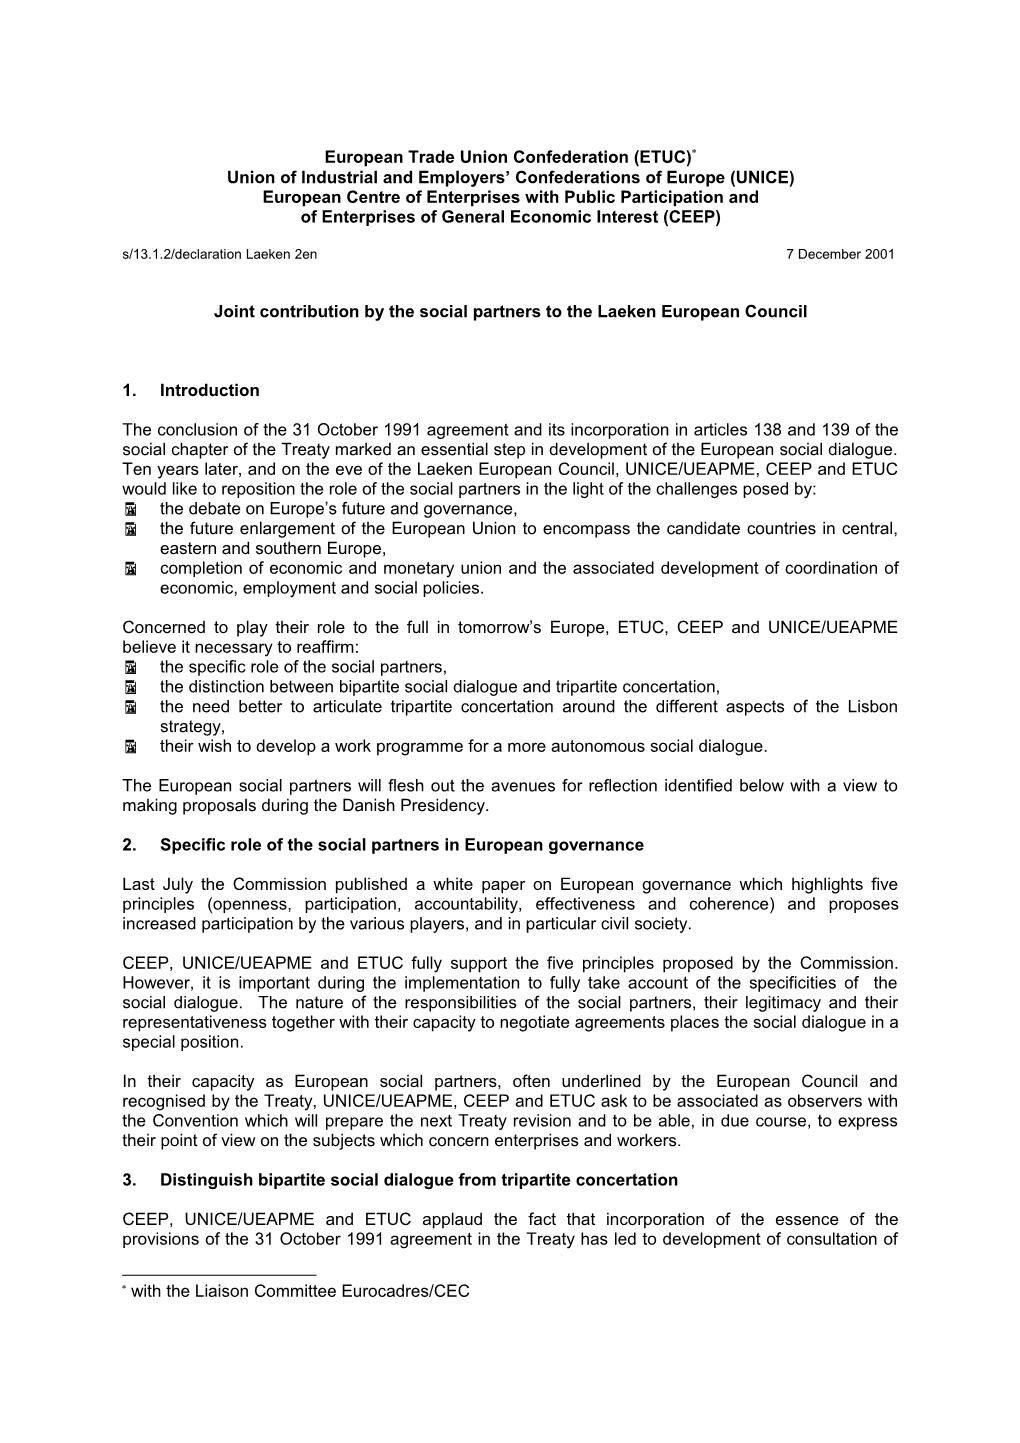 Union of Industrial and Employers Confederations of Europe (UNICE)